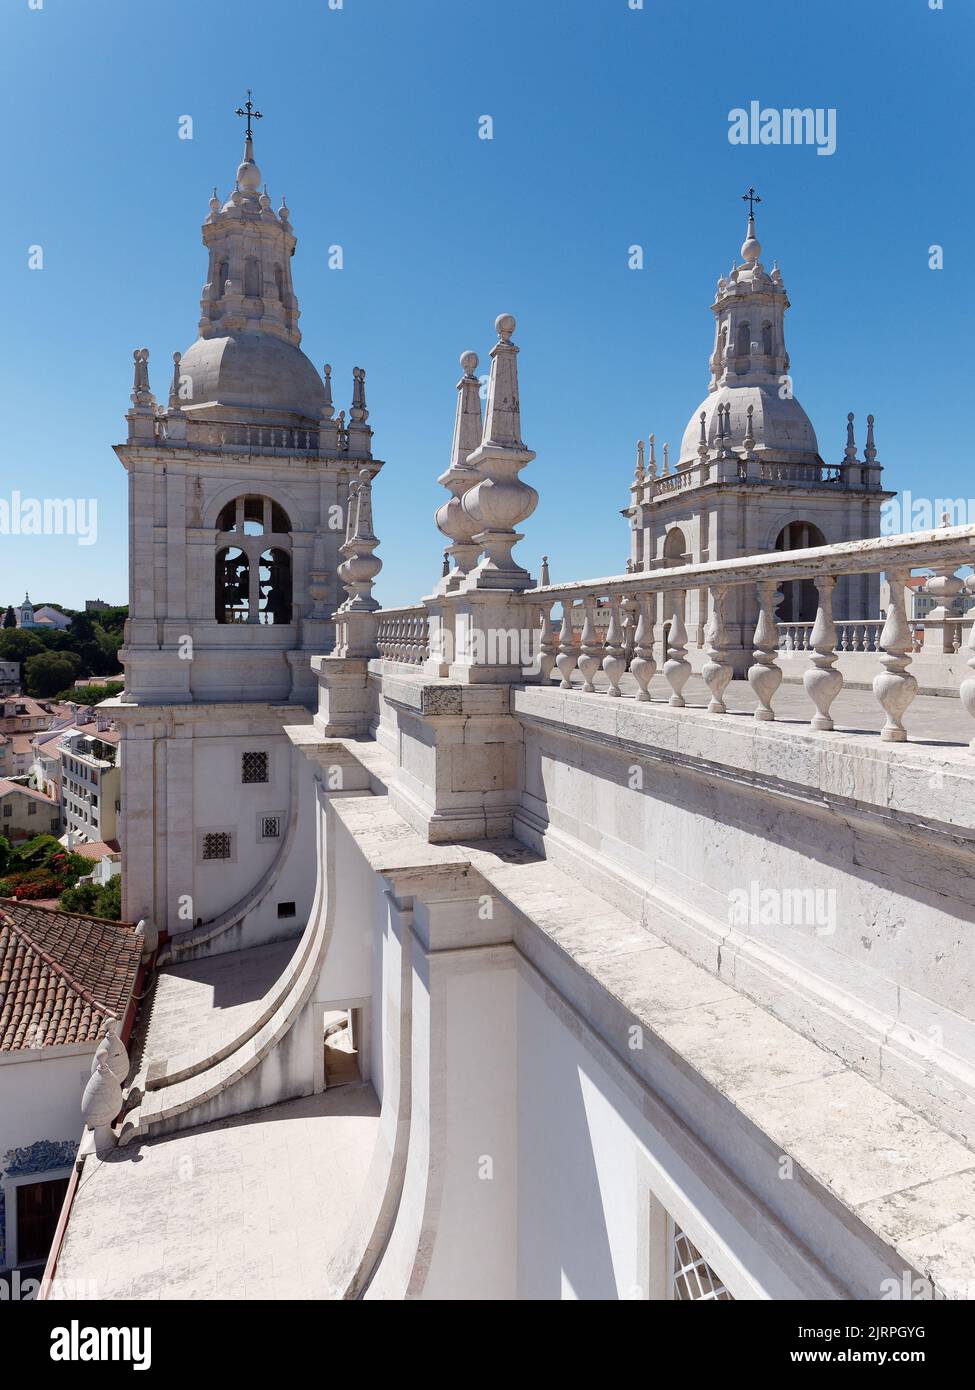 View from the roof of the Monastery of São Vicente de Fora (Monastery of Saint Vincent Outside the Walls) over Lisbon, Portugal. Stock Photo